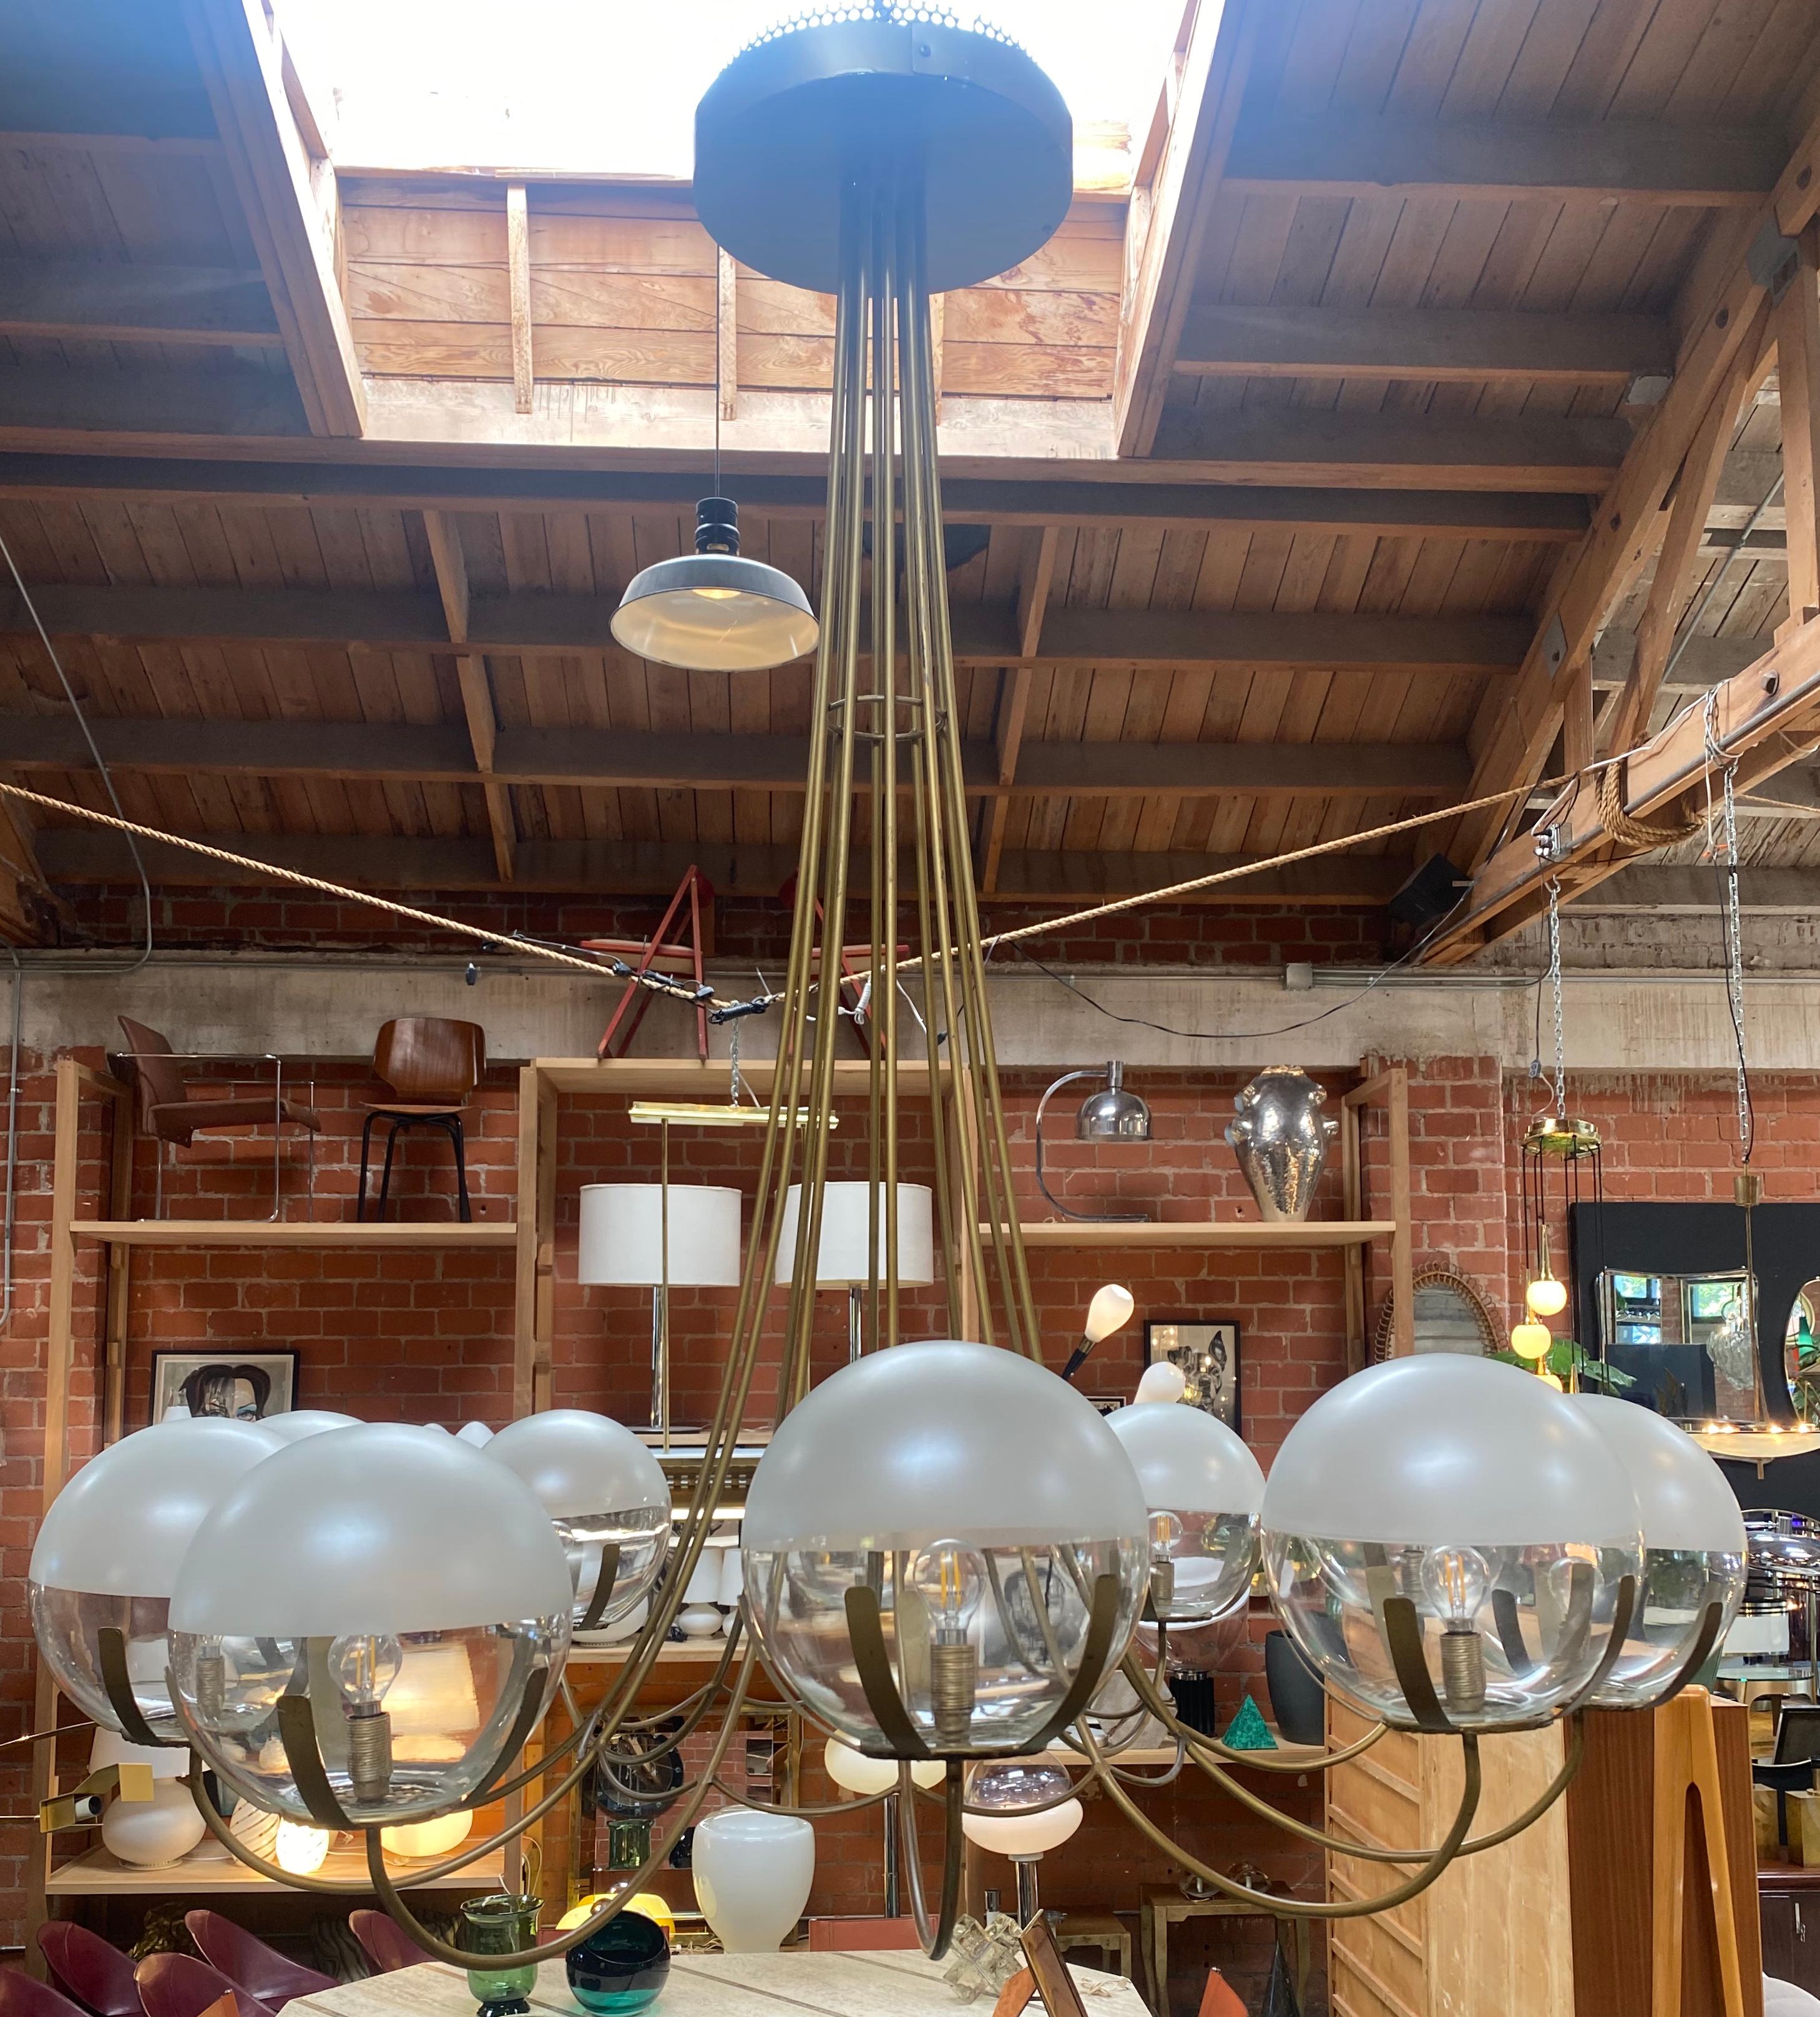 Beautiful oversize Italian fully brass chandelier composed form 10 spheres , the chandelier was made in 1970 in Italy present minor uses and vintage conditions. Fully functional this chandelier is ready to complete a mid century style home. A piece